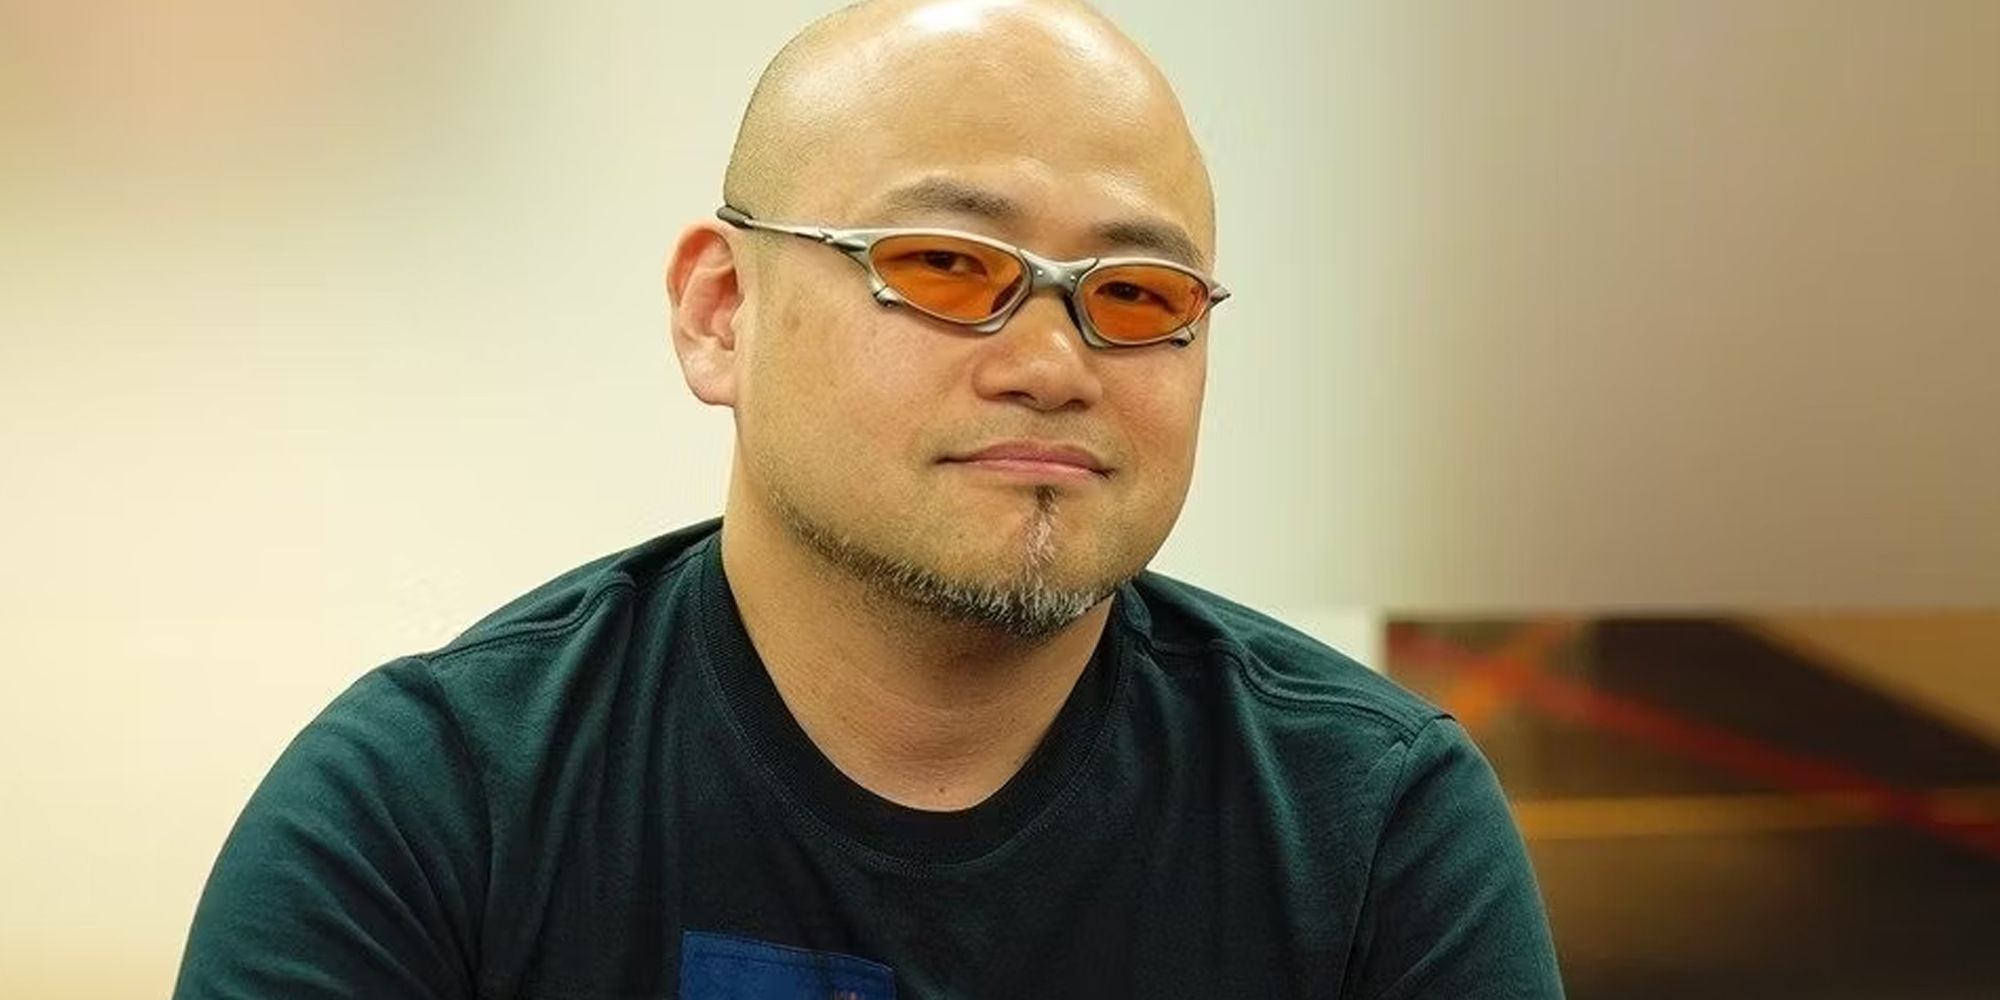 hideki  sitting in front of a cream-coloured wall with orange sunglasses